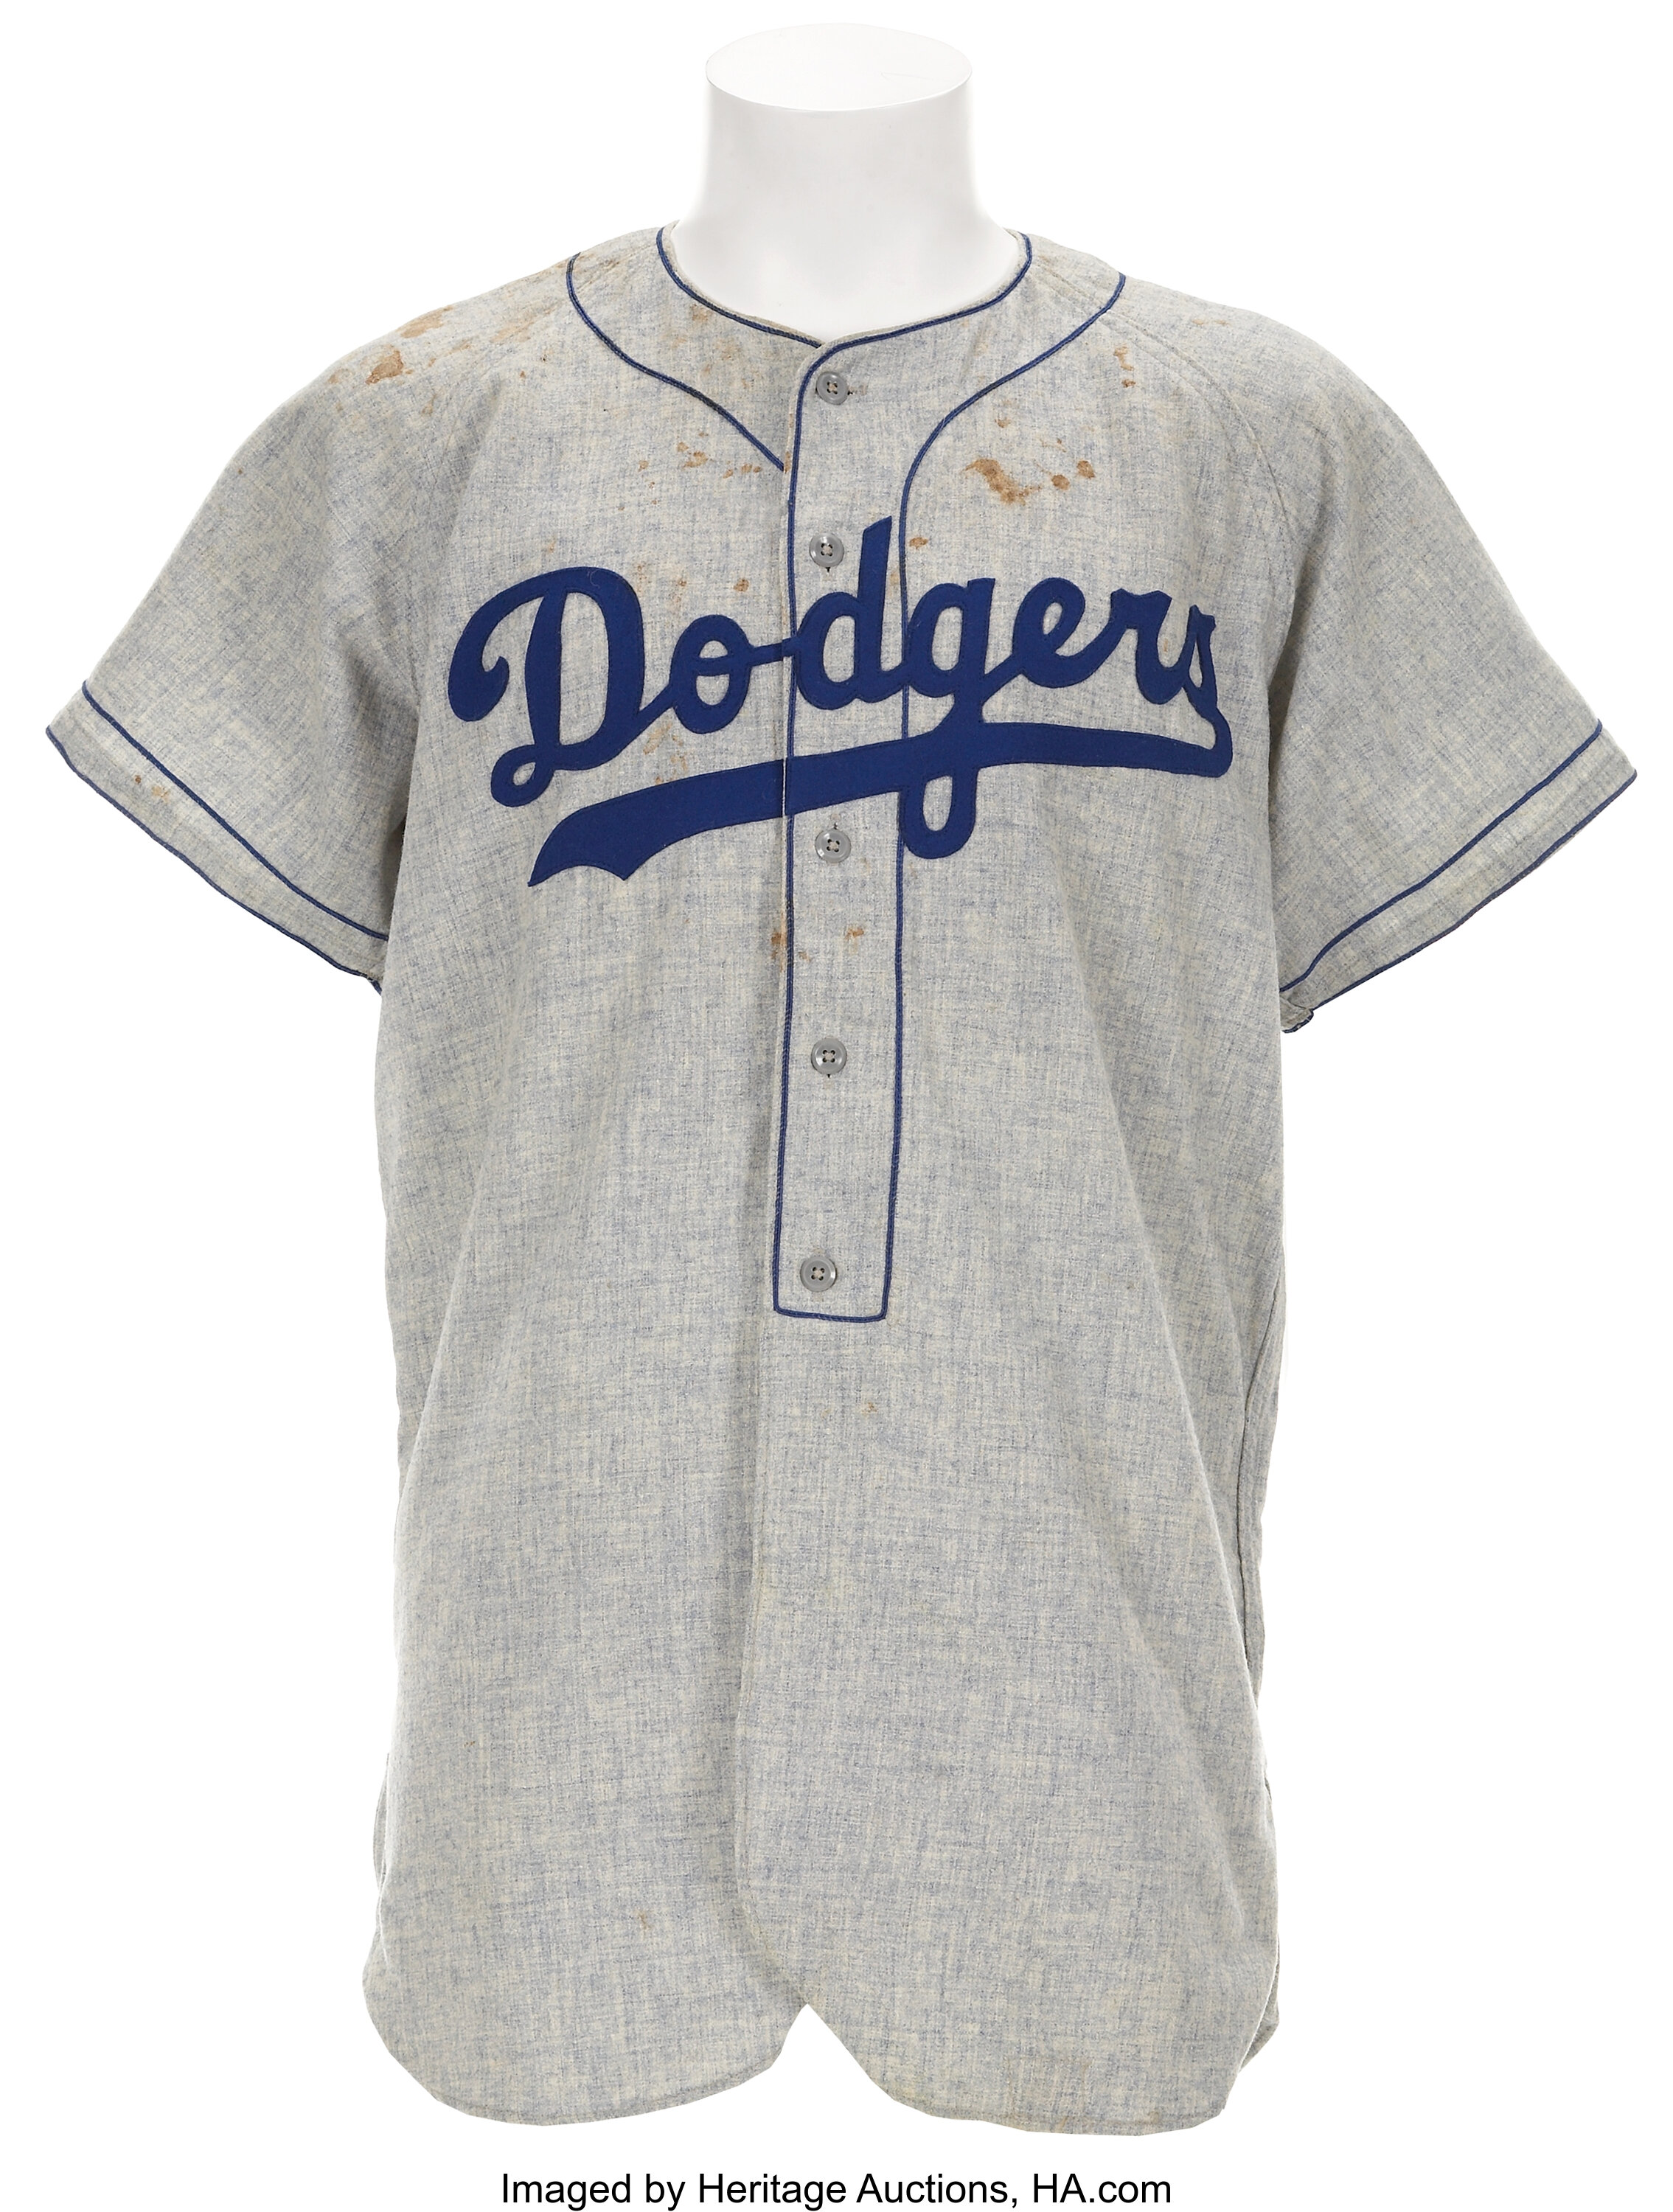 1955 Brooklyn Dodgers Game Issued Jersey. Baseball Collectibles